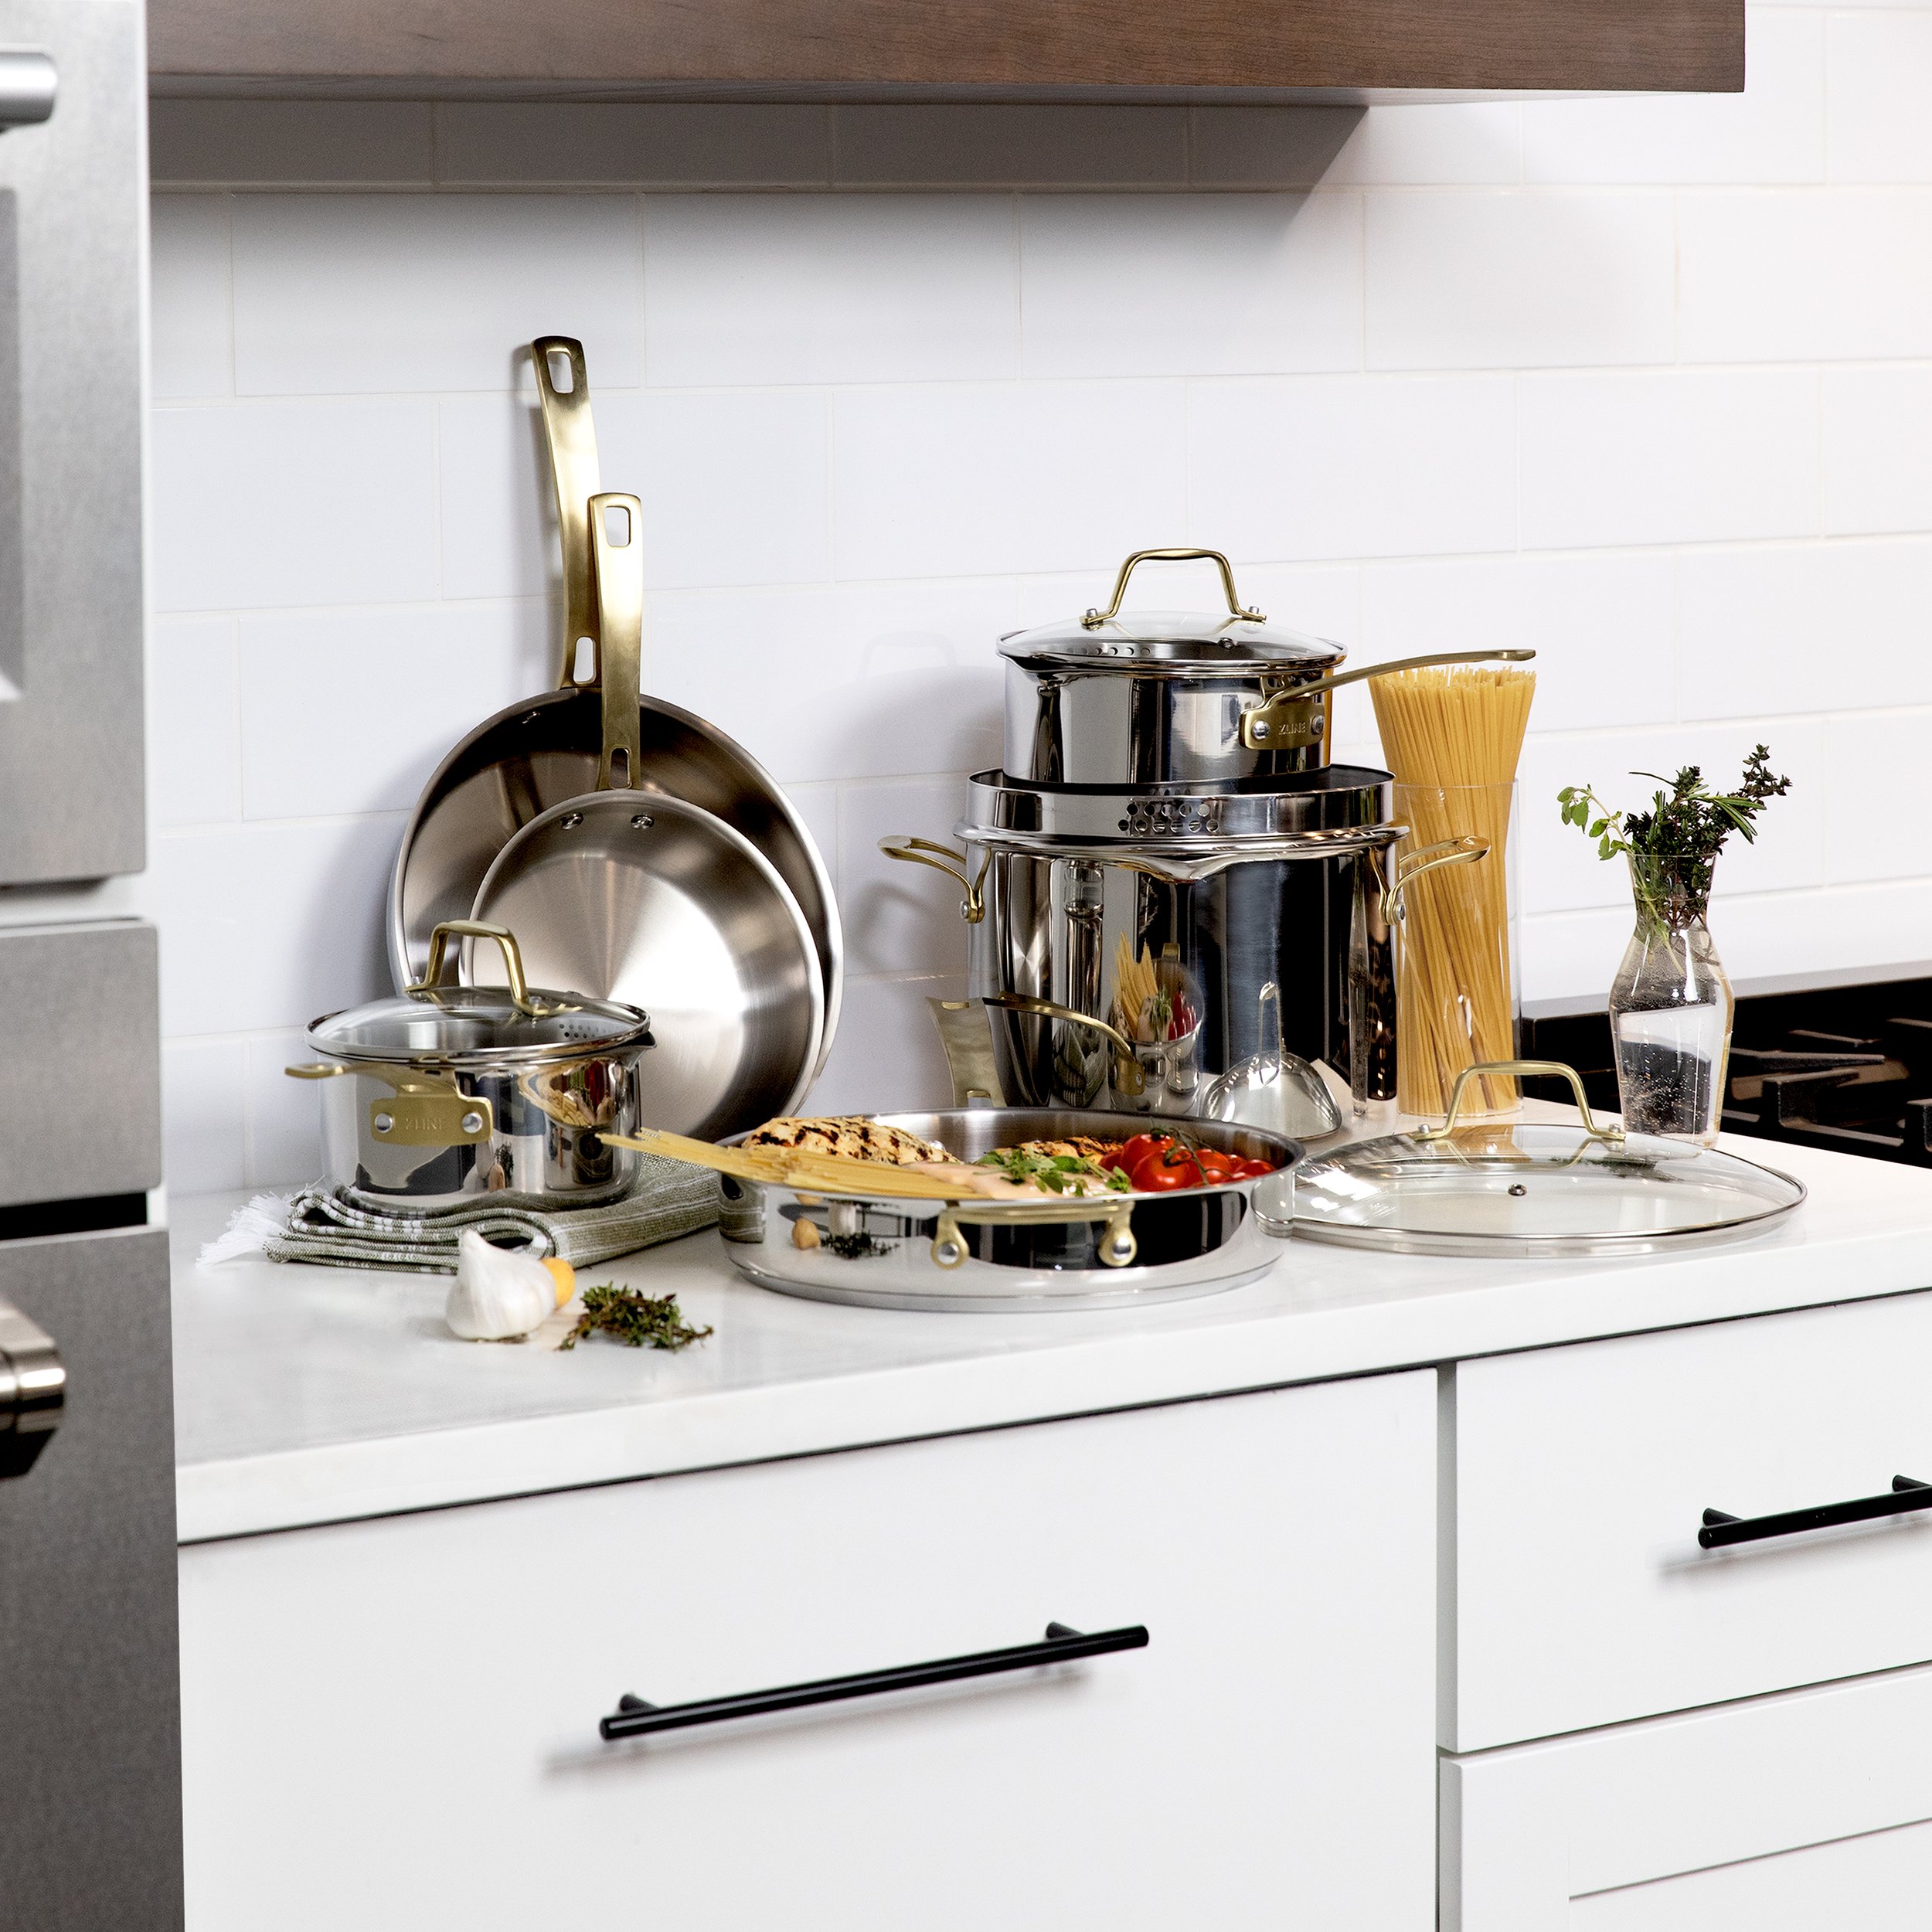 Introducing All-New ZLINE Cookware Sets